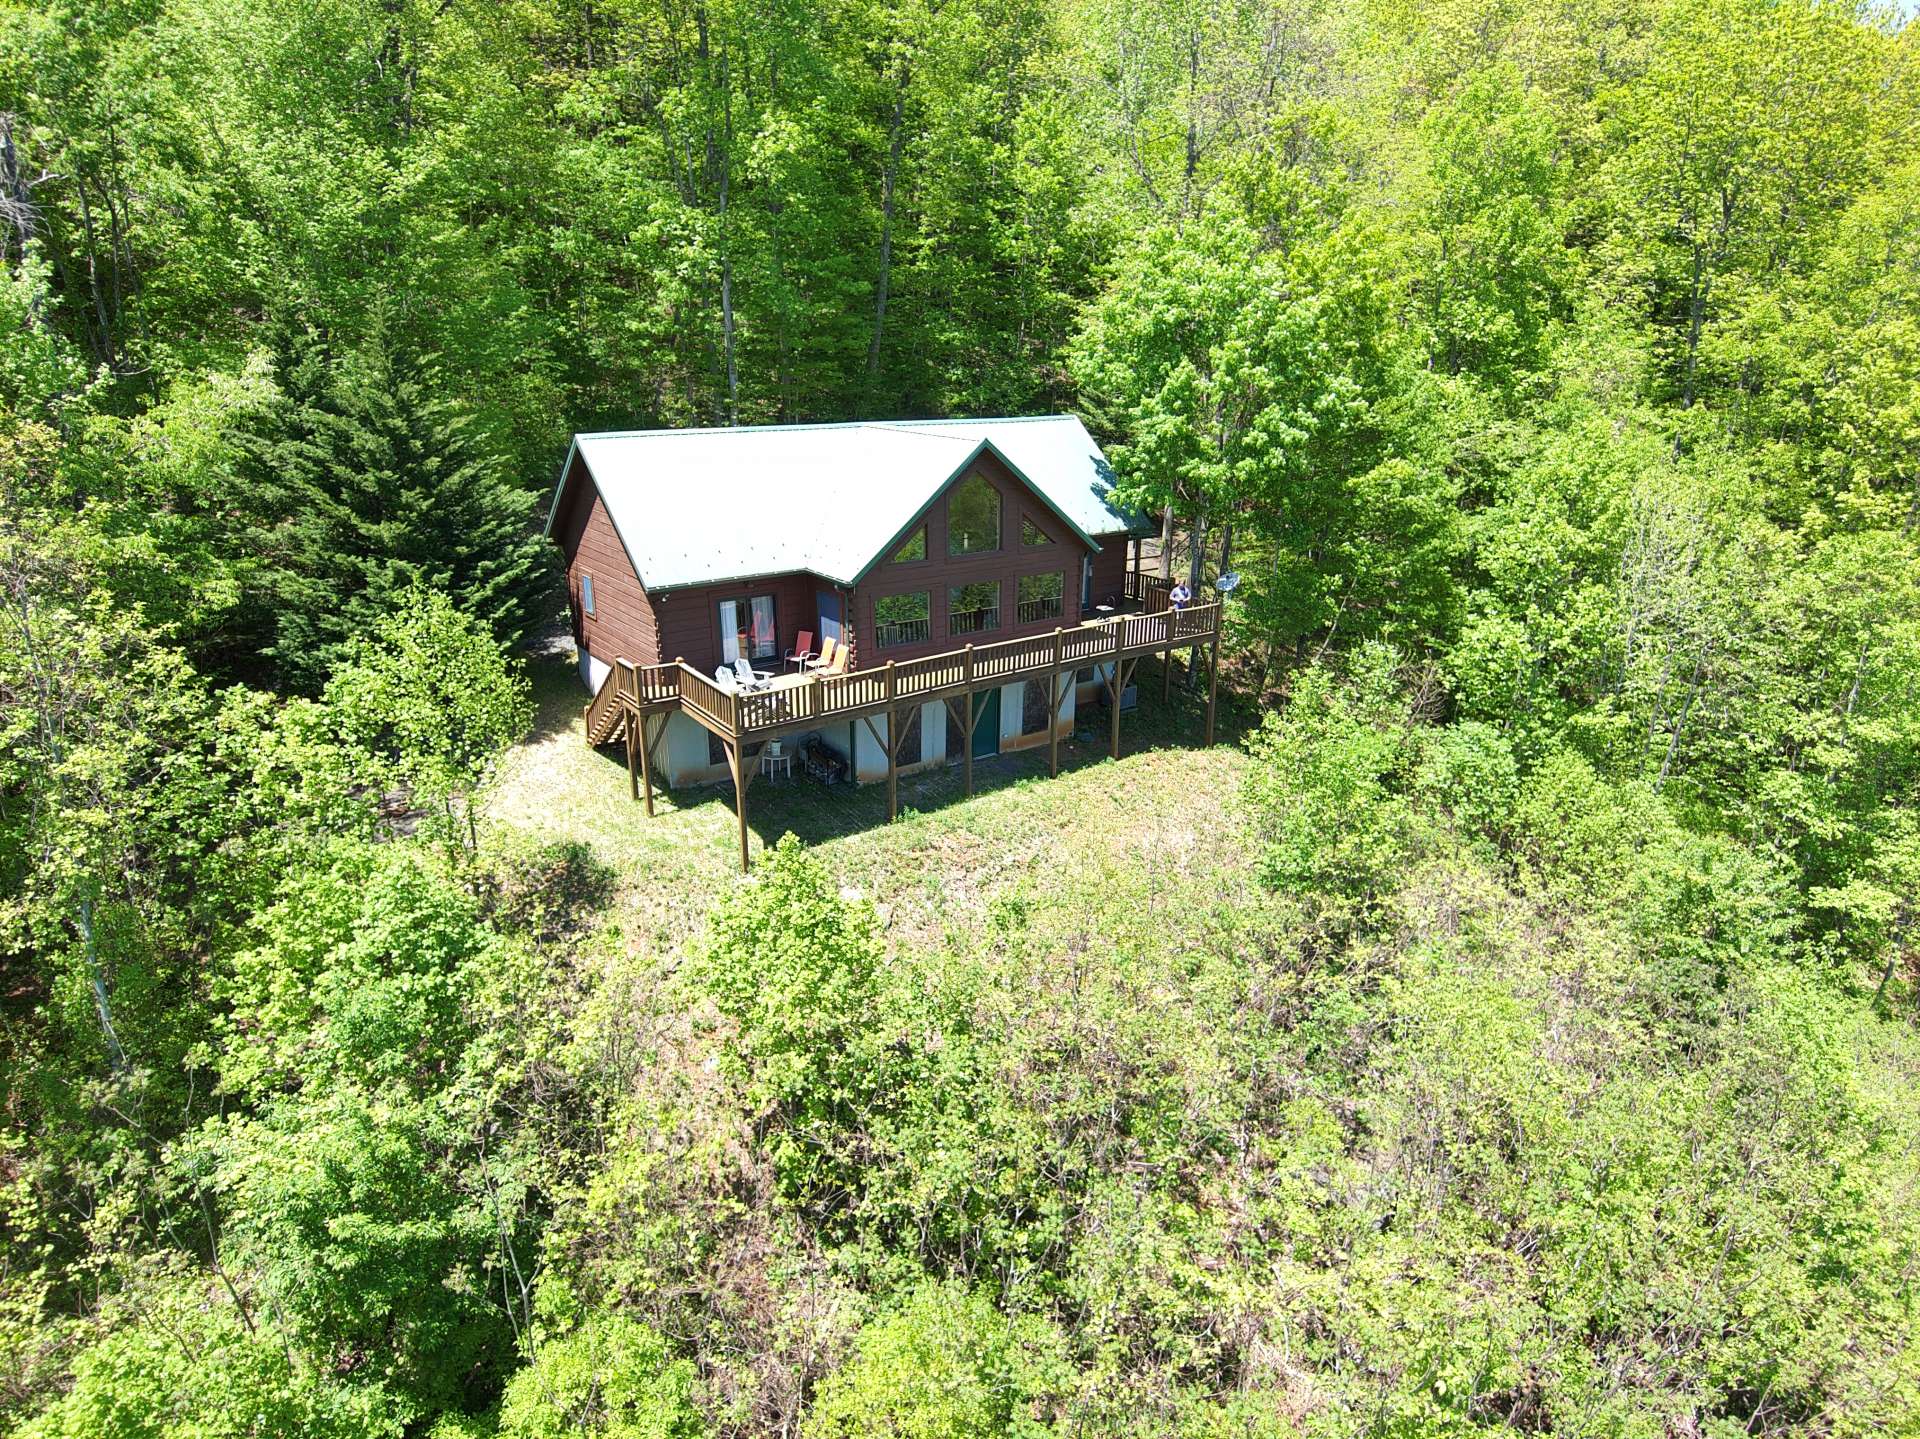 The 13.7 acre setting offers privacy along with a diverse mixture of hardwoods, evergreens, and native mountain foliage.